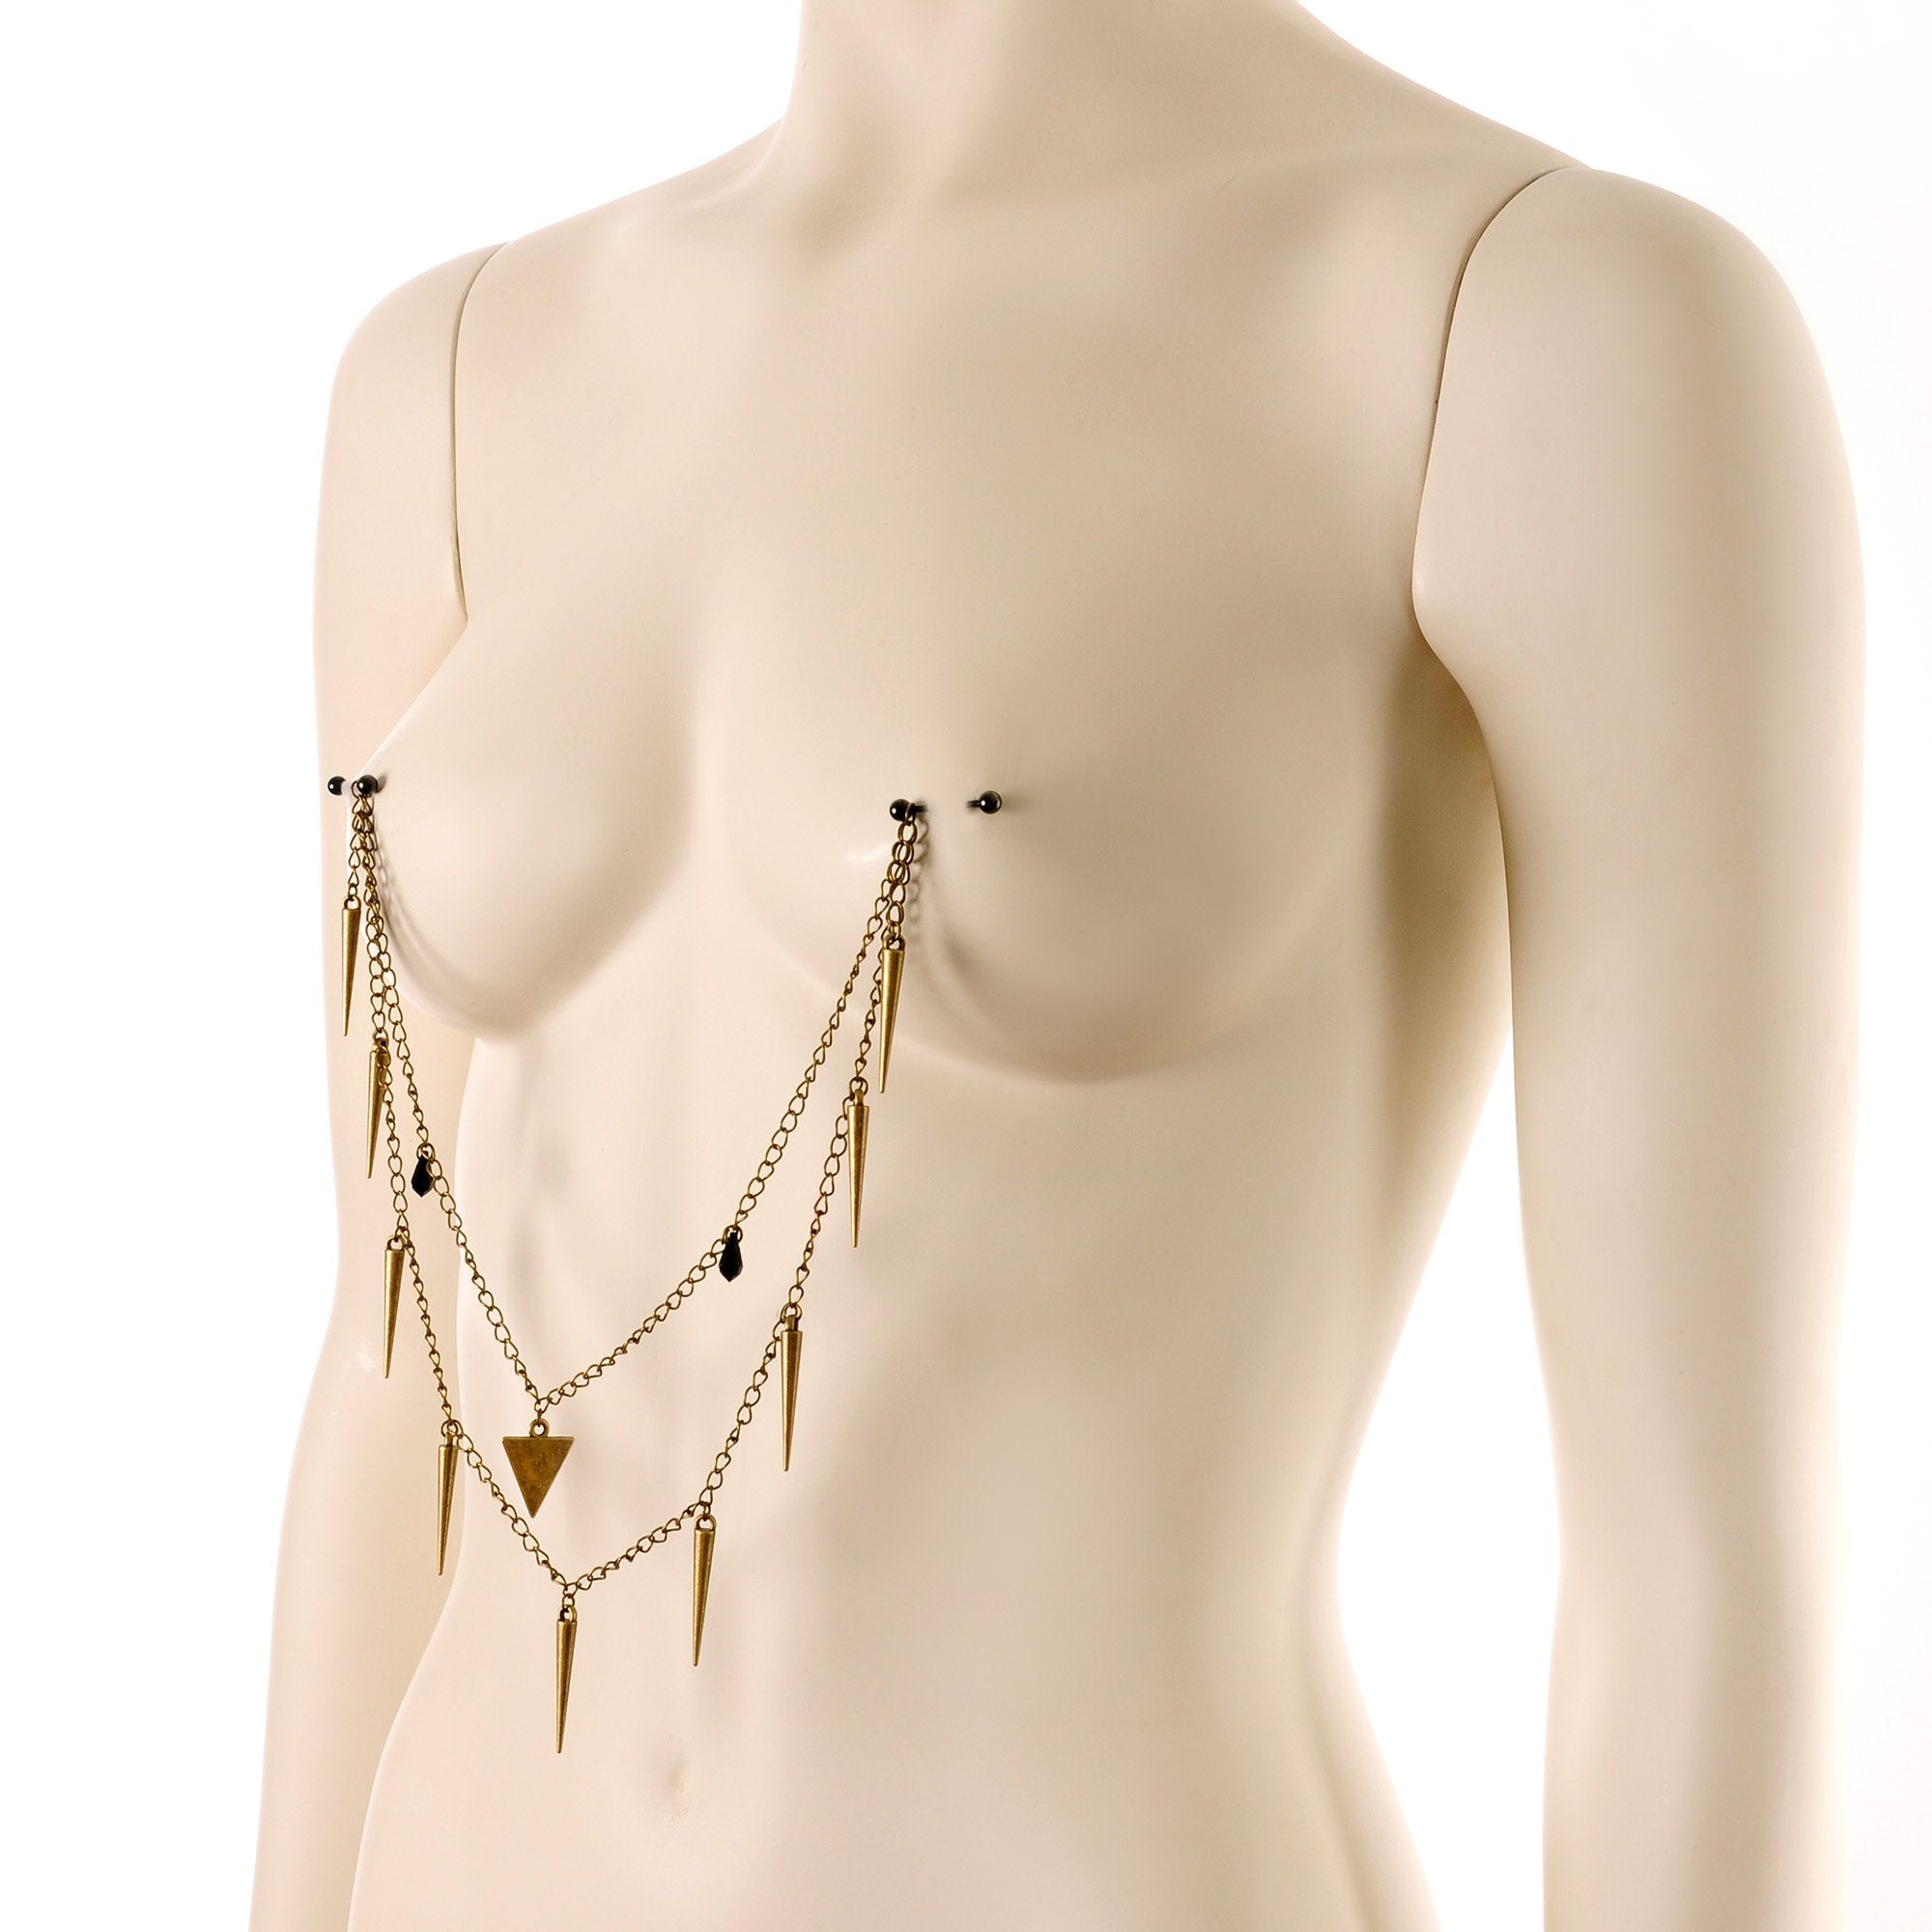 Handcrafted Warrior Drop Nipple Chain Created with Crystal